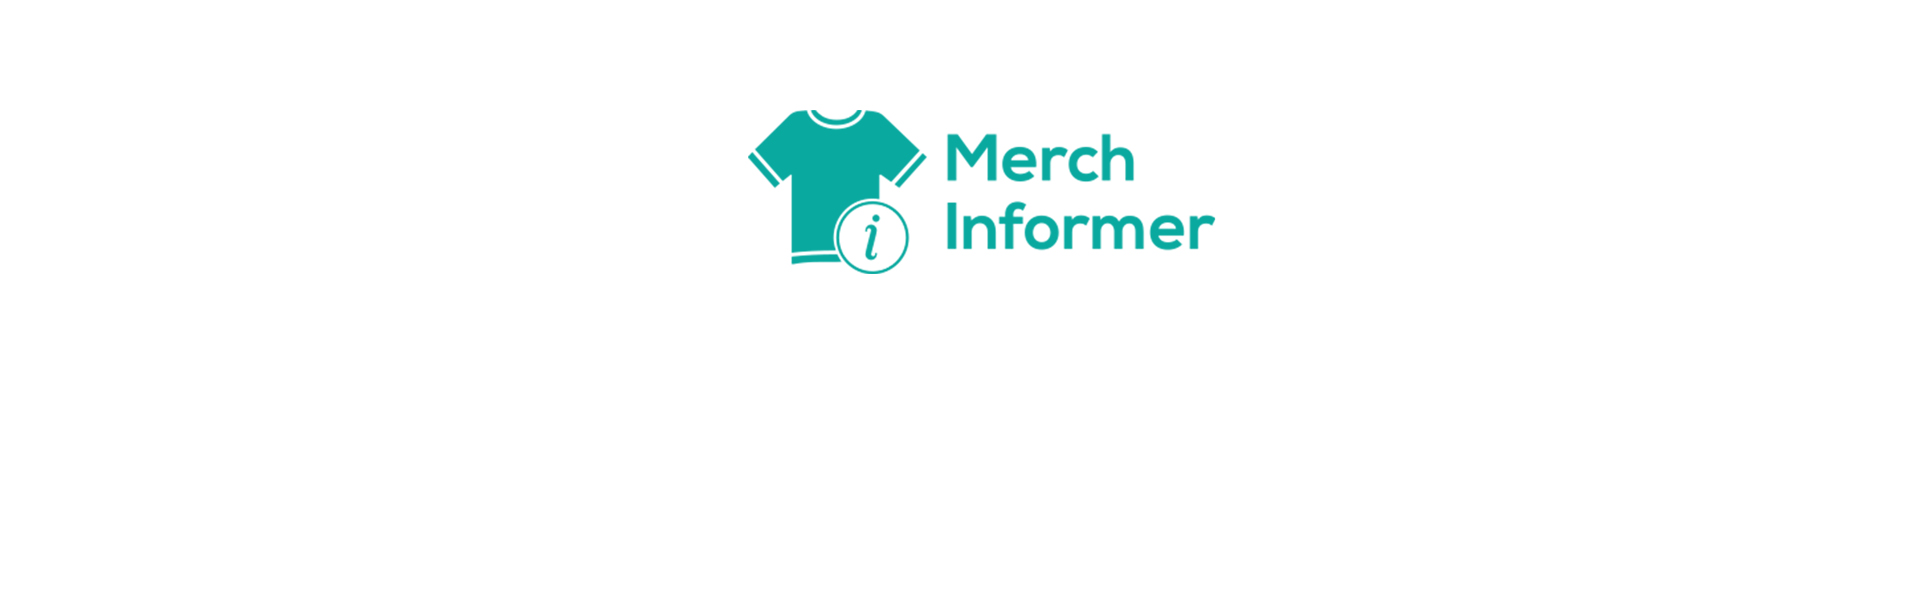 Merch Informer – Selling Merch Online Does Not Need To Be Stressful